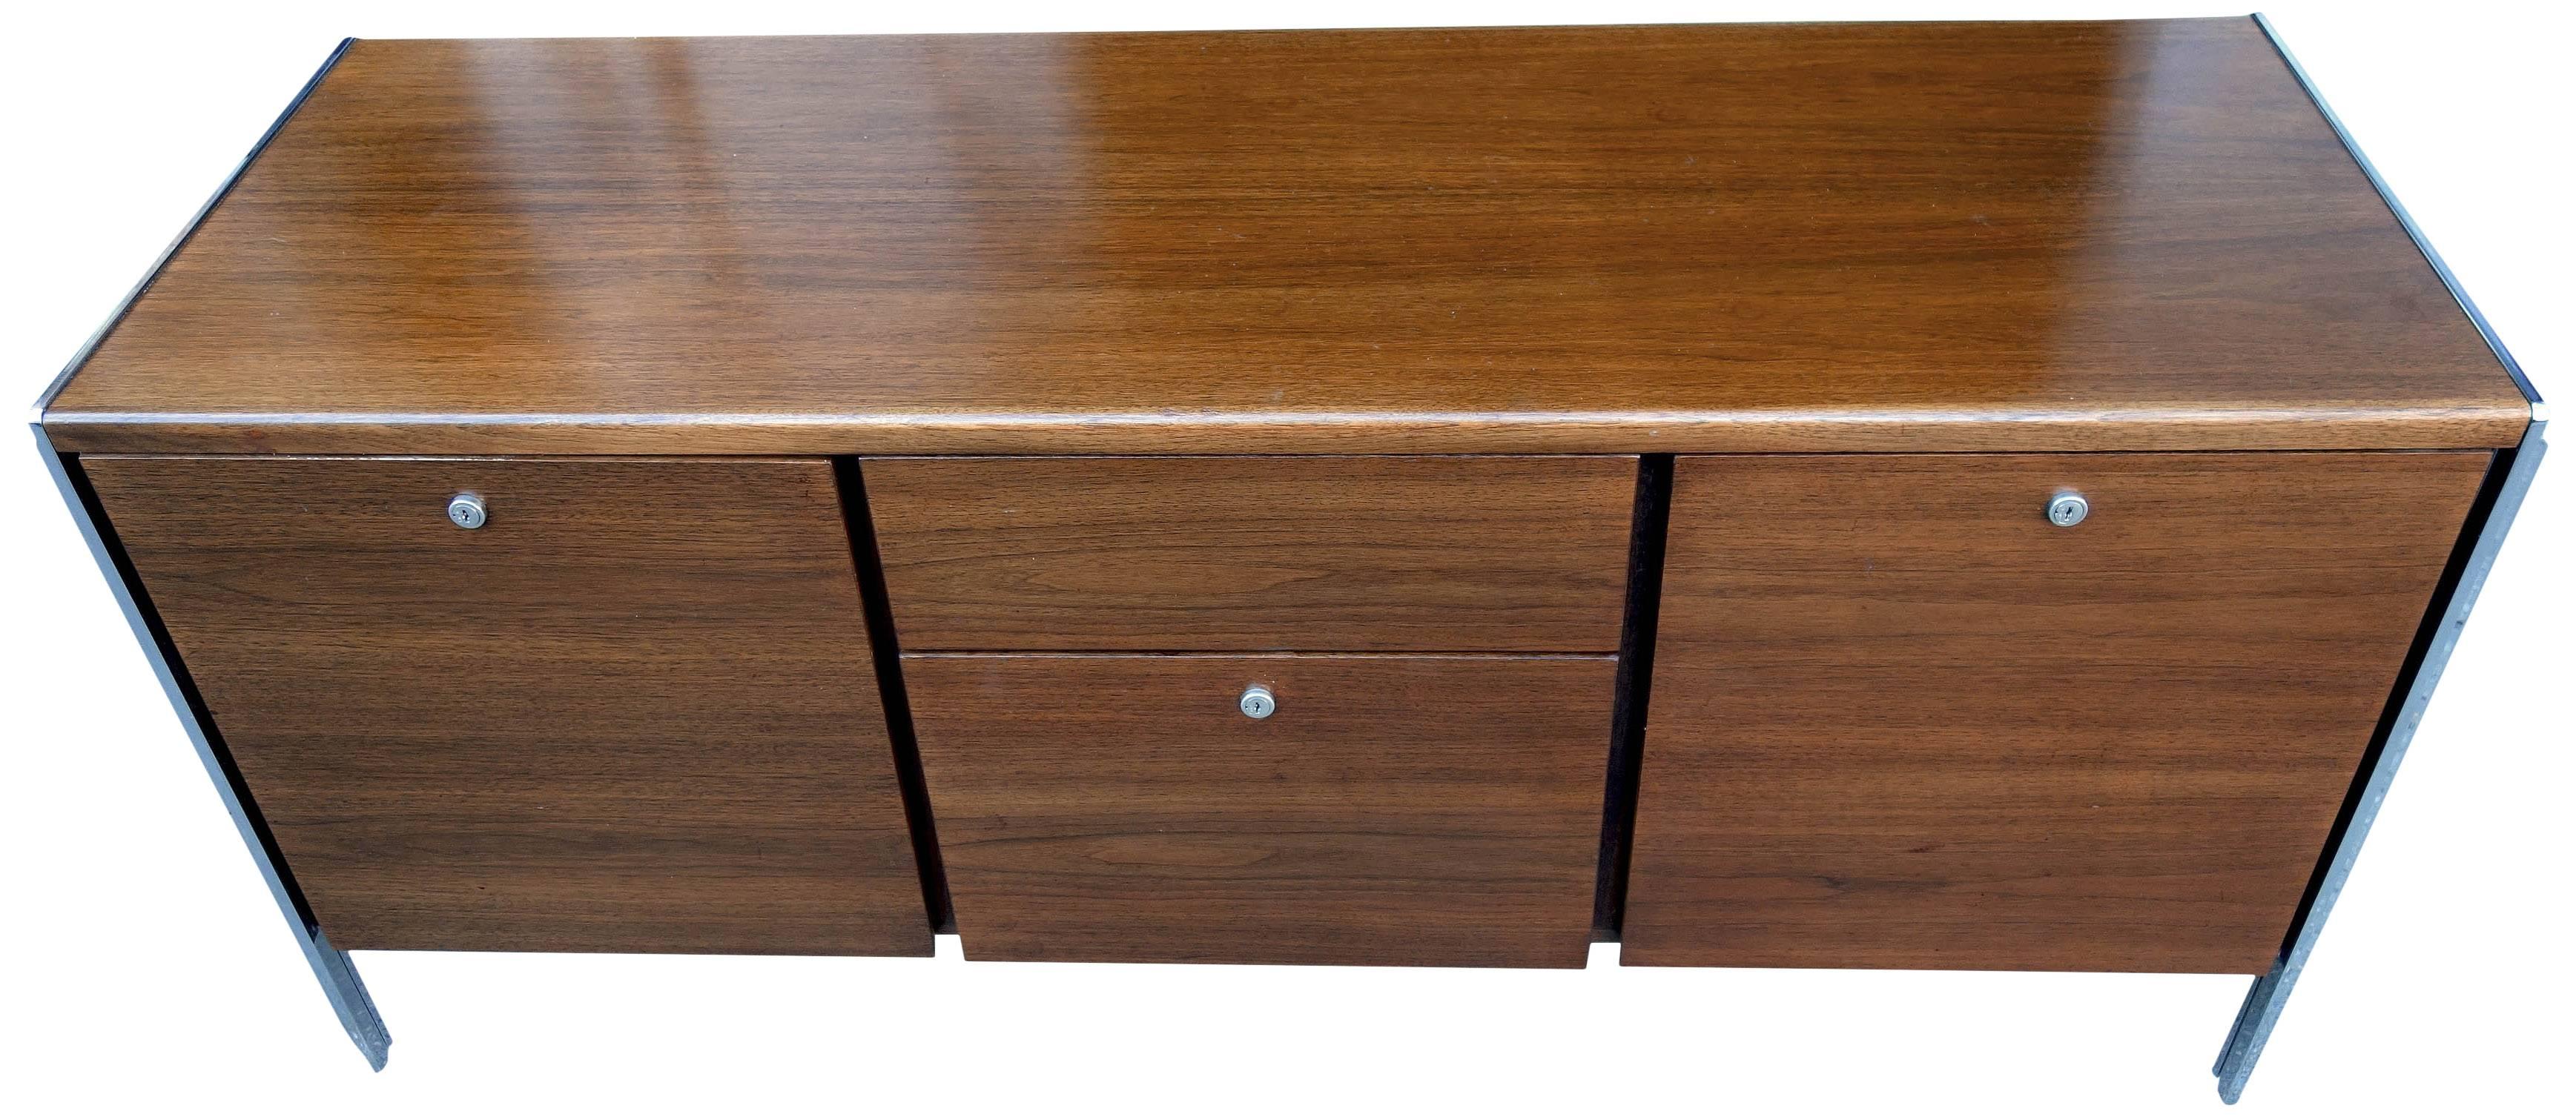 Sleek midcentury credenza / cabinet by Stow and Davis accentuated by chrome accents. Originally from an executive office with Knoll and Stow & Davis furnishings. A very solid case piece.